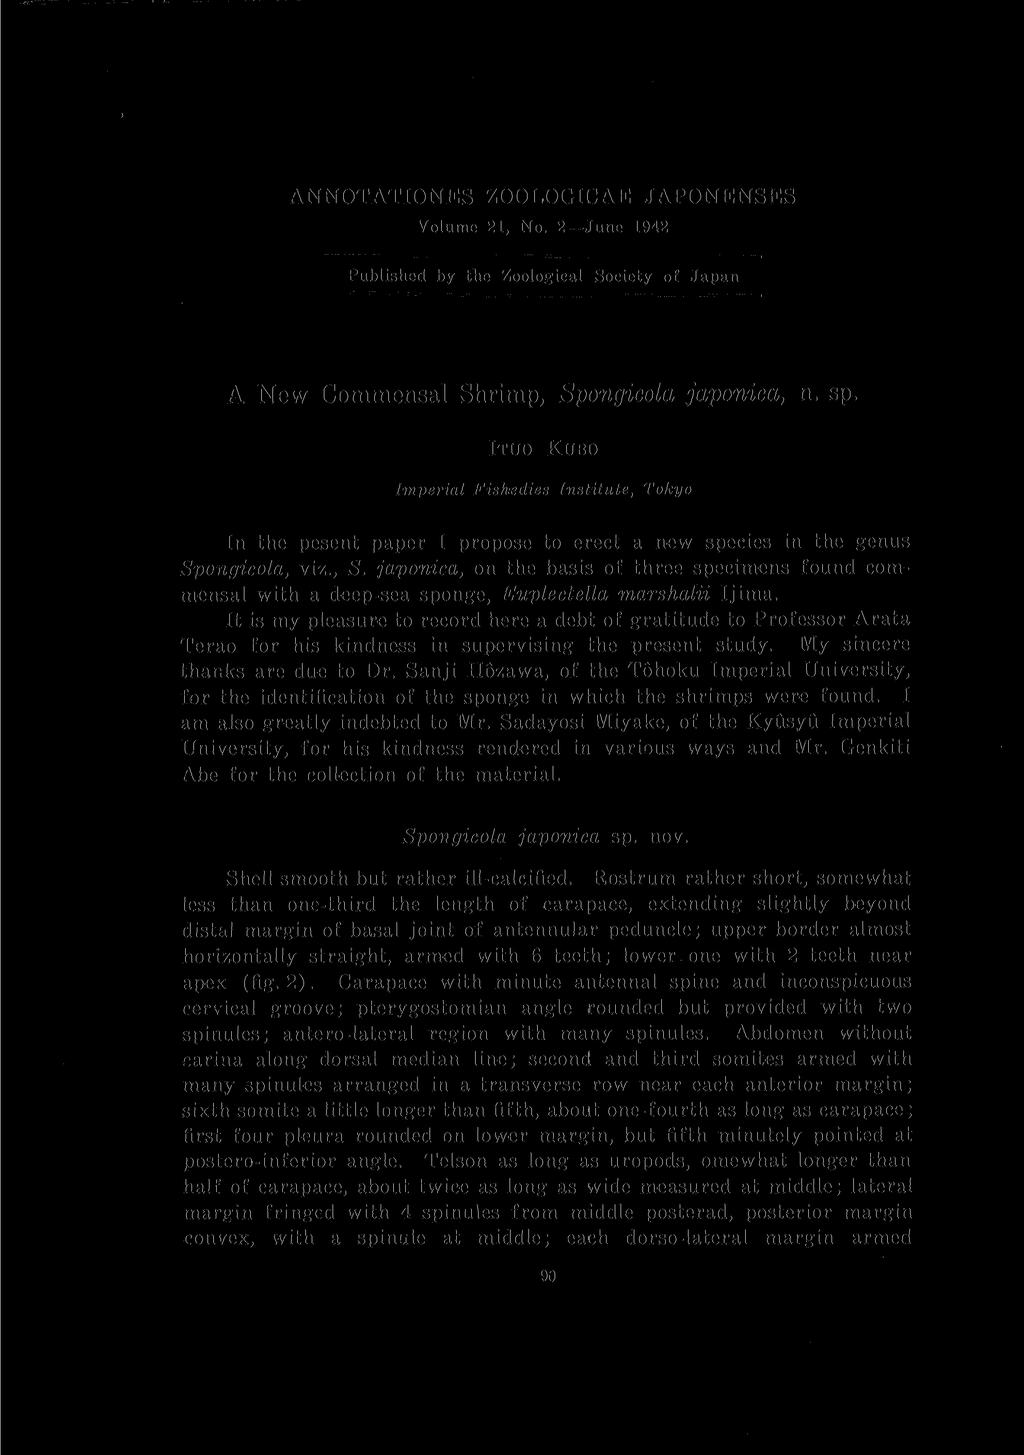 ANNOTATIONES ZOOLOGICAE JAPONENSES Volume 21, No. 2 June 1942 Published by the Zoological Society of Japan A New Commensal Shrimp, Spongicola japonica, n. sp.